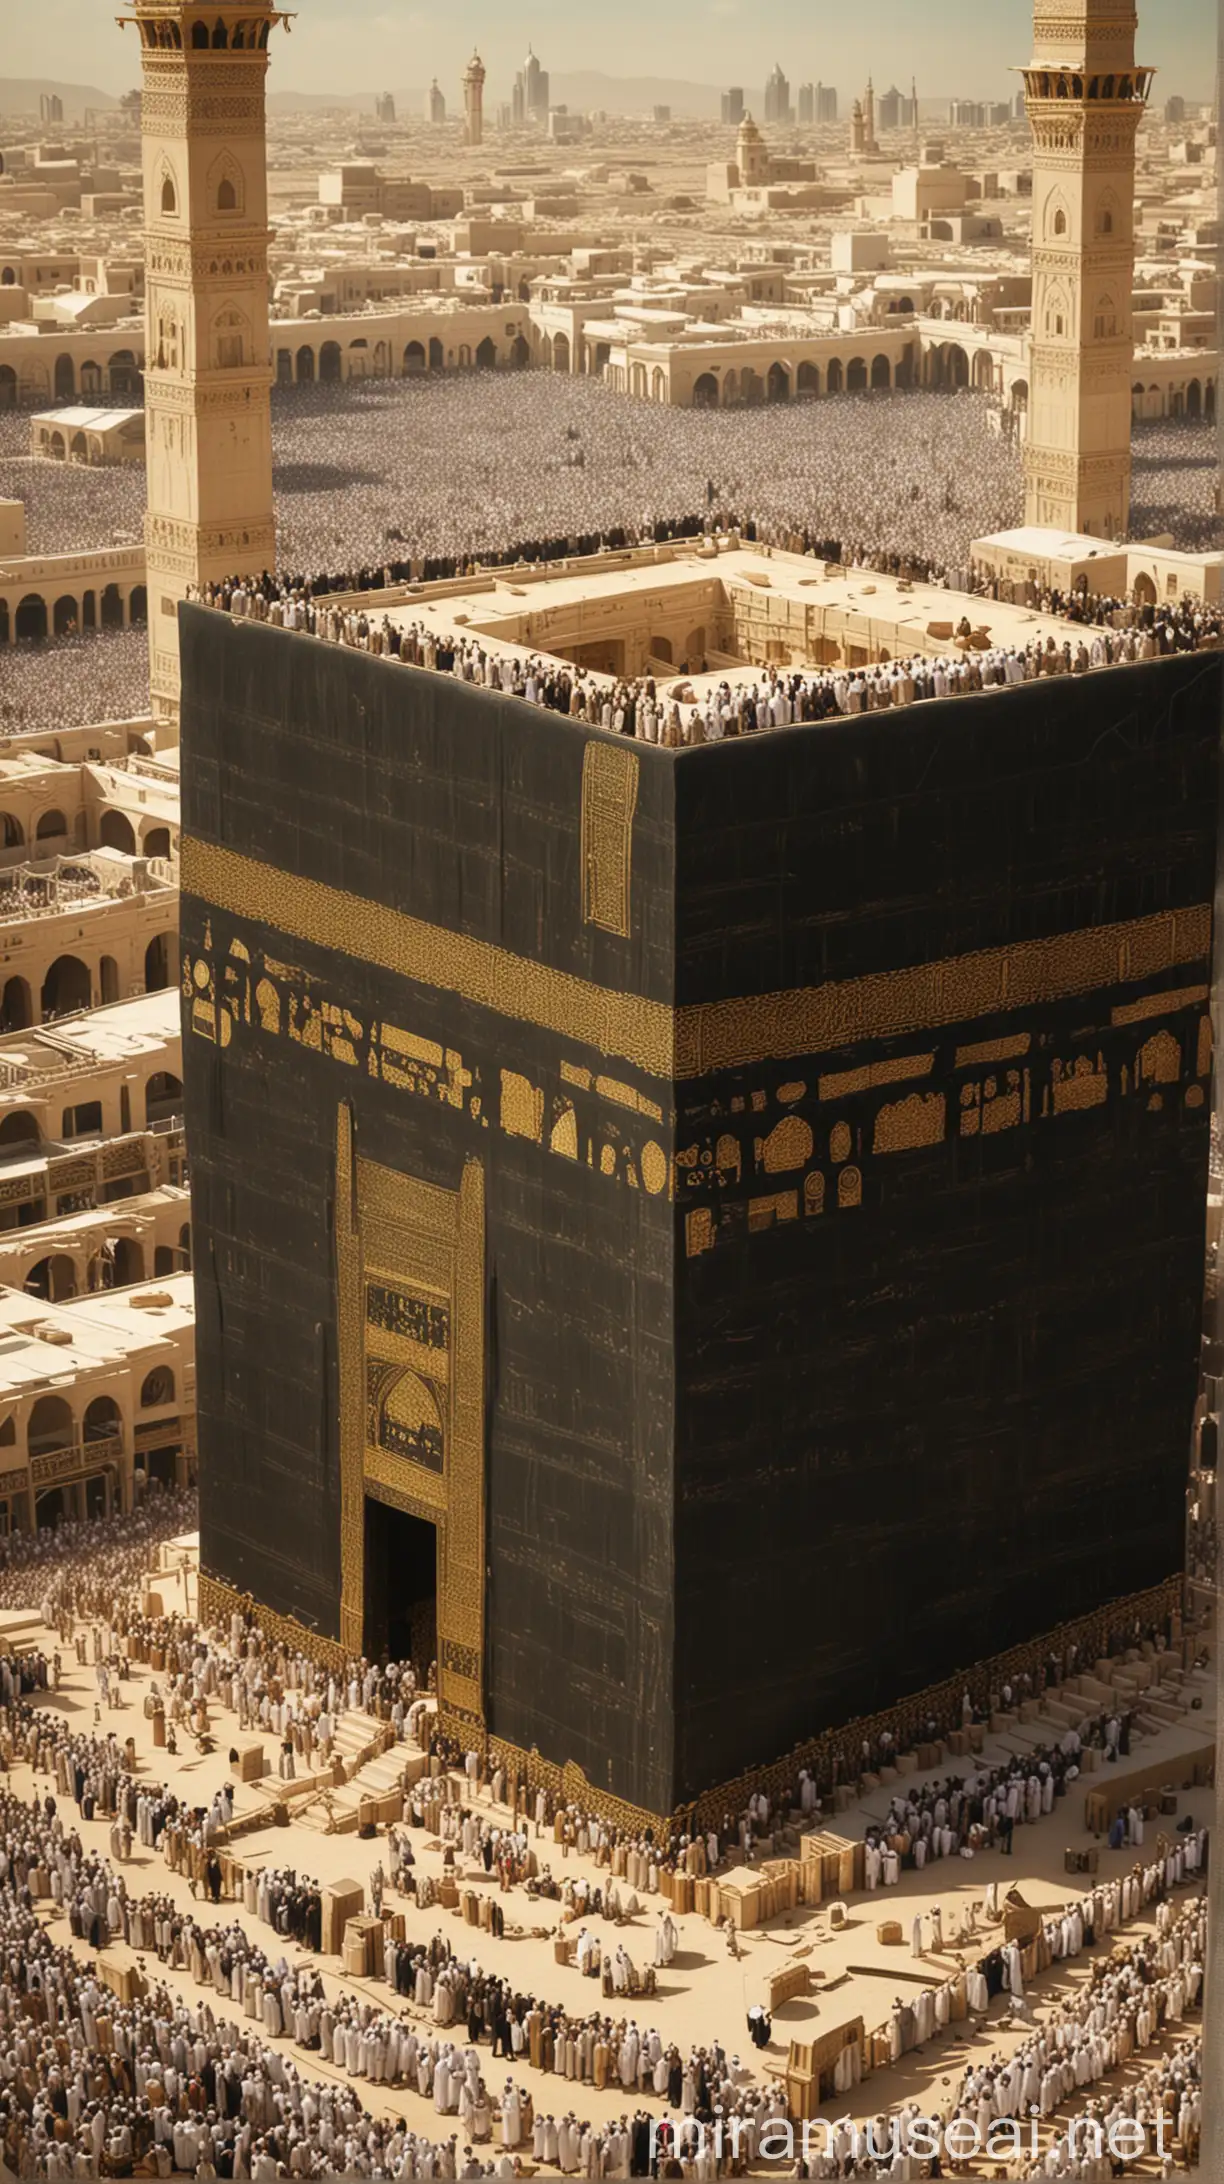 The Sacred Construction: Illustrate Prophet Adam (AS) building the Kaaba as the first house of worship, guided by Allah's divine instruction. Show Adam laying the foundation stones with reverence and devotion.islamic tradition
